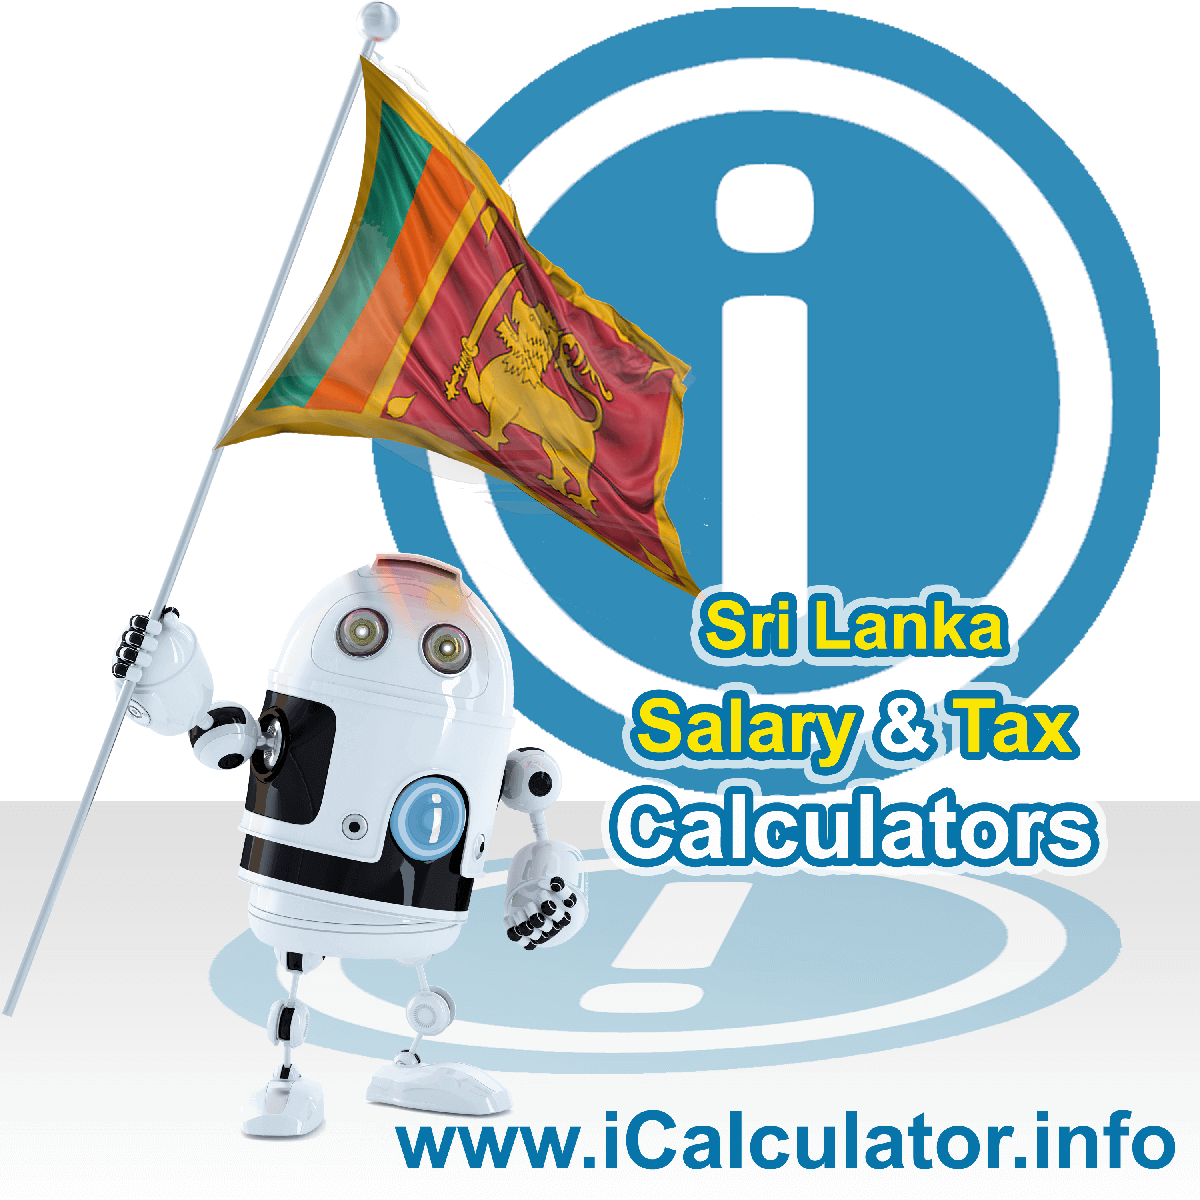 Sri Lanka Wage Calculator. This image shows the Sri Lanka flag and information relating to the tax formula for the Sri Lanka Tax Calculator